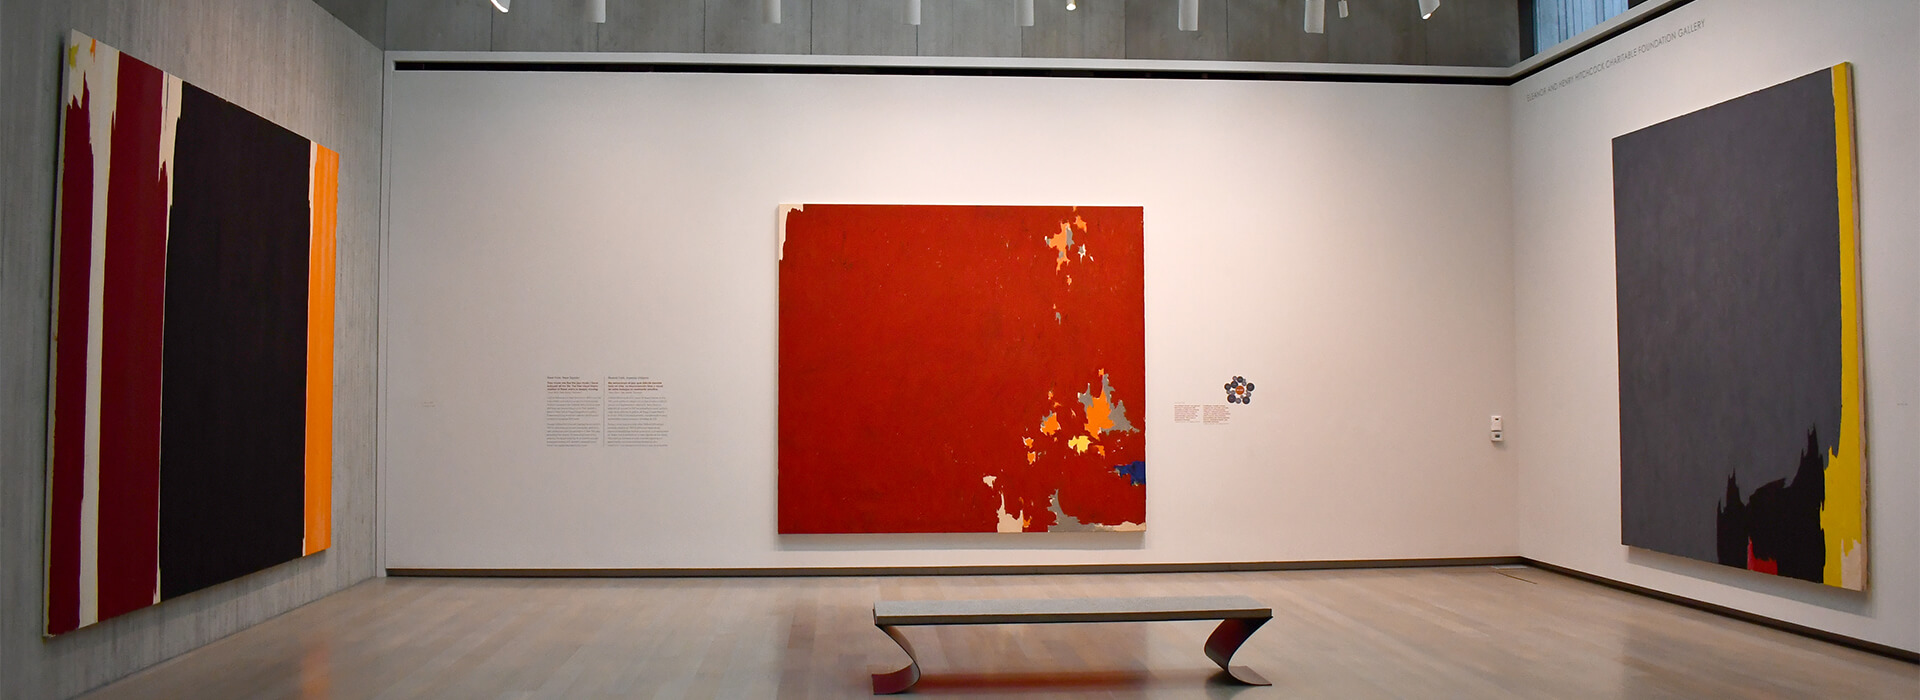 Gallery installation image with three large colorful abstract paintings and a bench